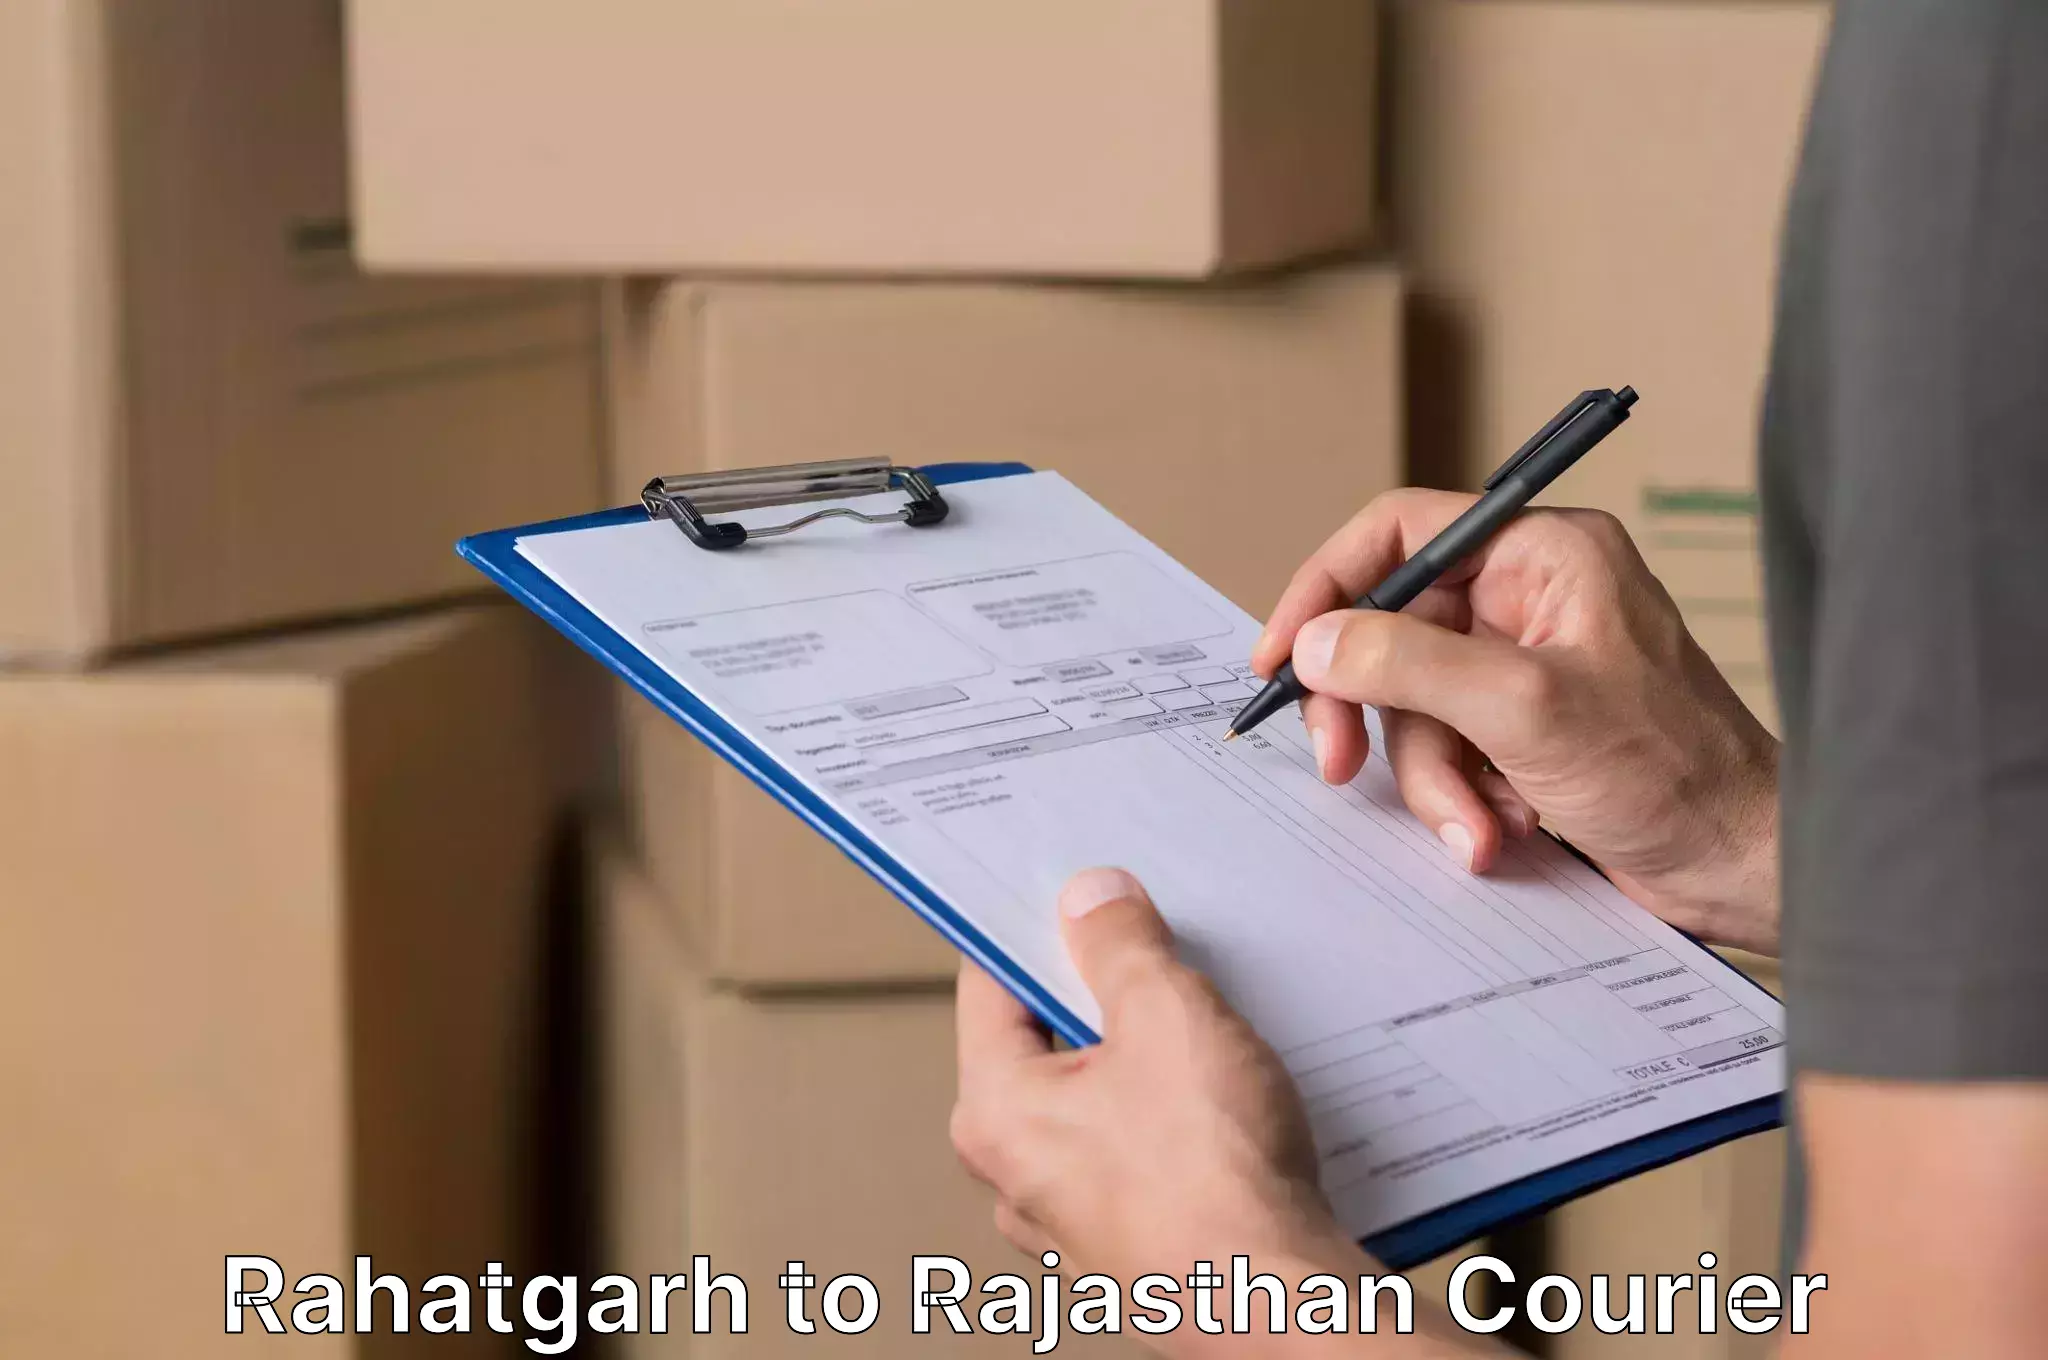 Comprehensive relocation services in Rahatgarh to Kuchaman